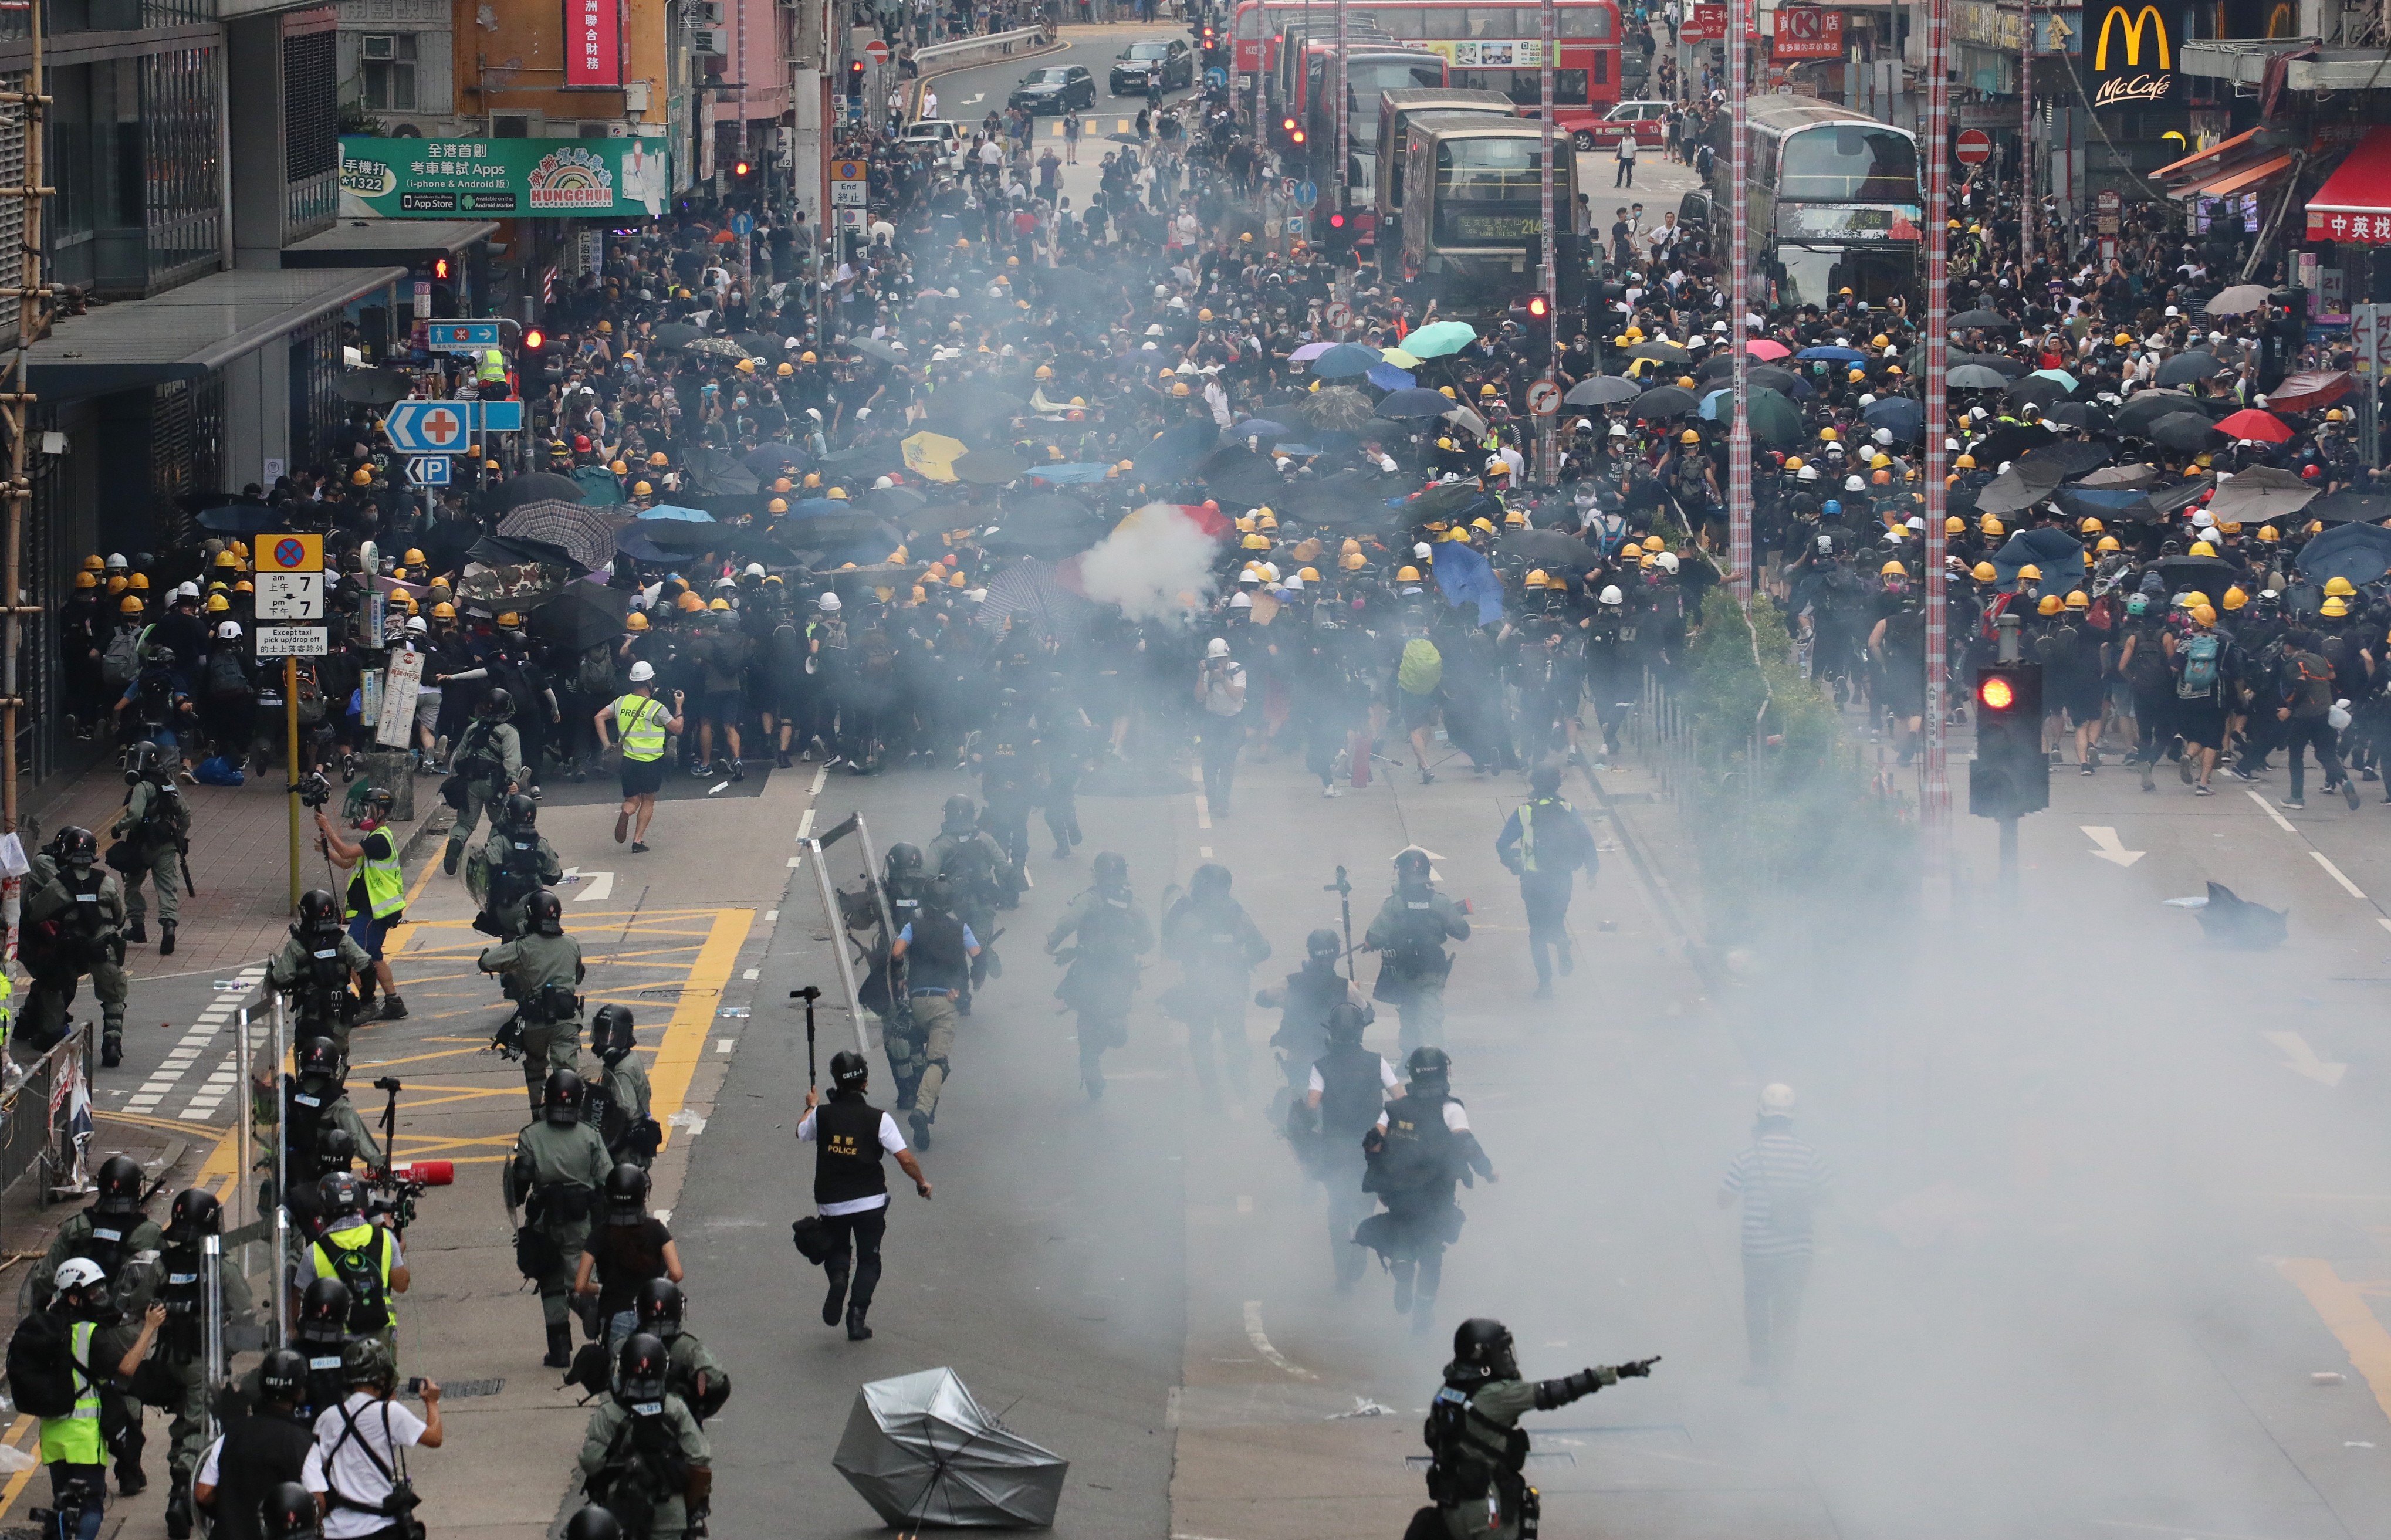 Anti-government protesters and riot police clash in Sham Shui Po on Sunday. Reda says the violent protests over the last two months have worsened the city’s economic slump and eroded its core values. Photo: Felix Wong